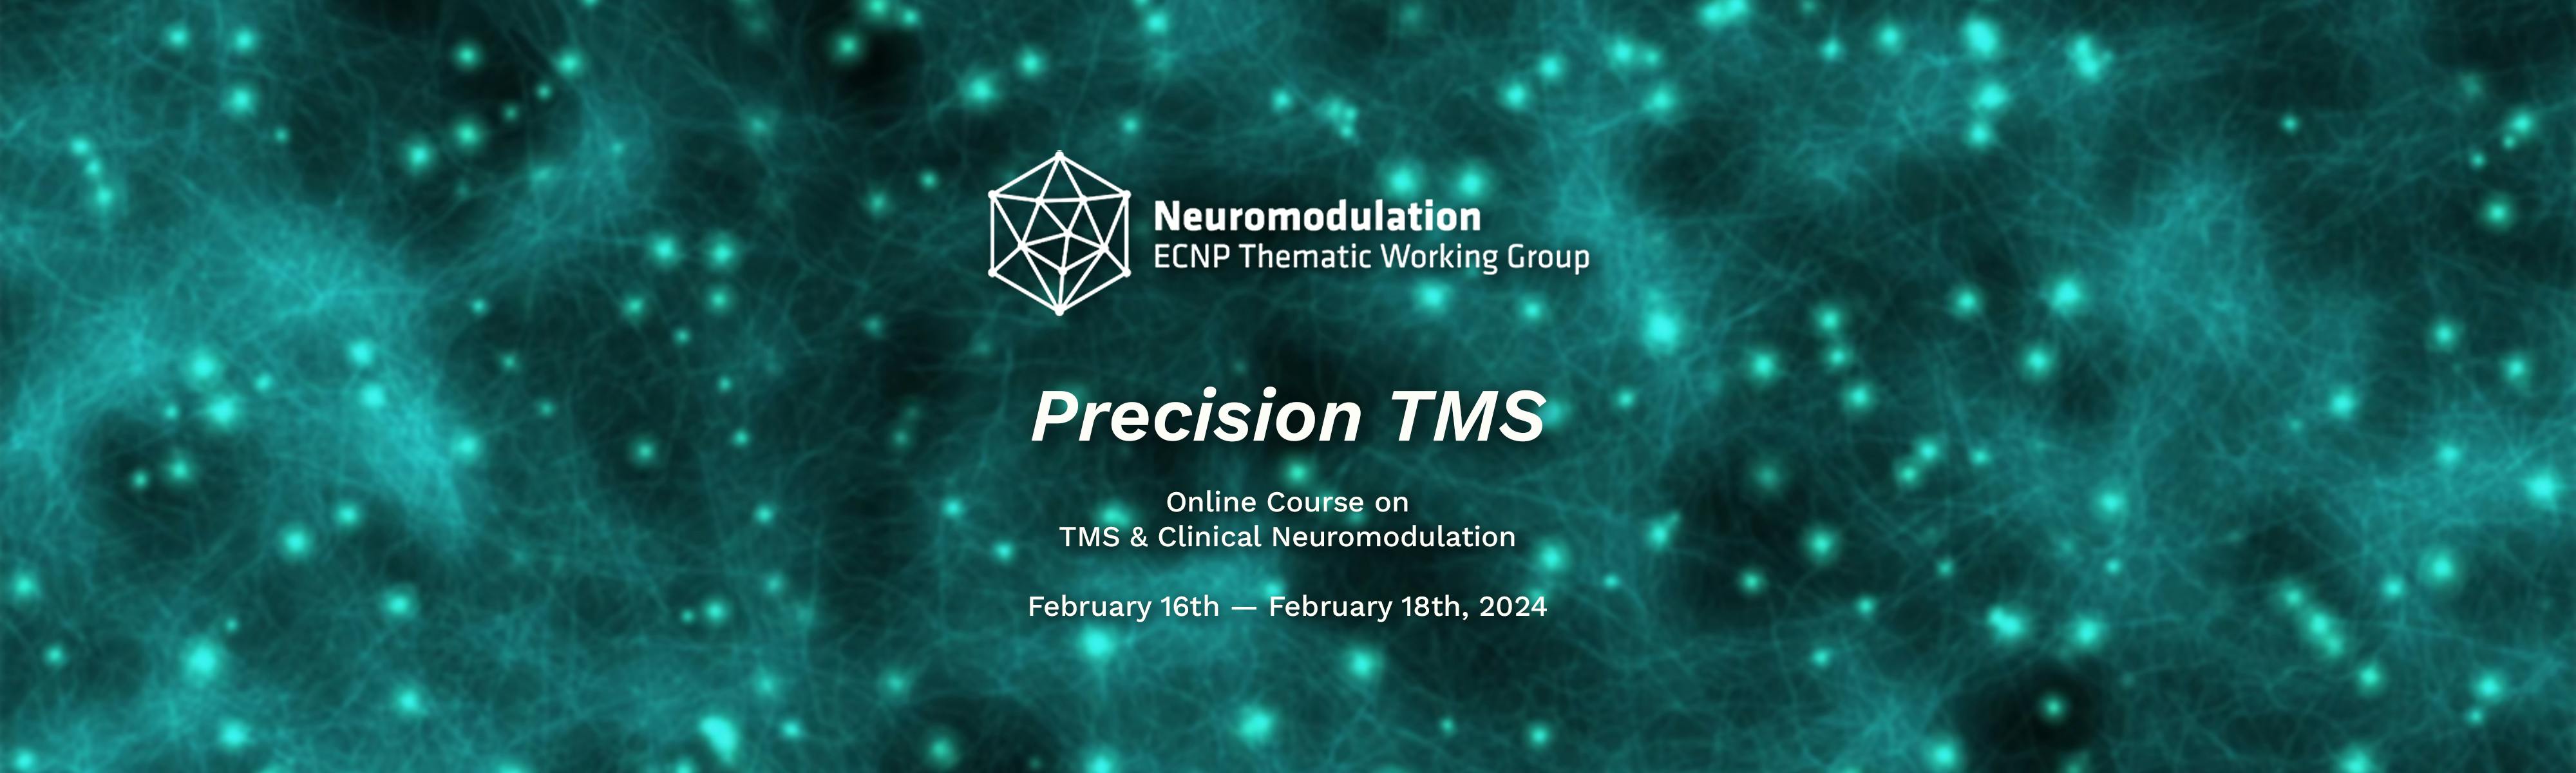 Logos of the Neuromodulation ECNP Thematic Working Group on an image of neuronal networks as a background.